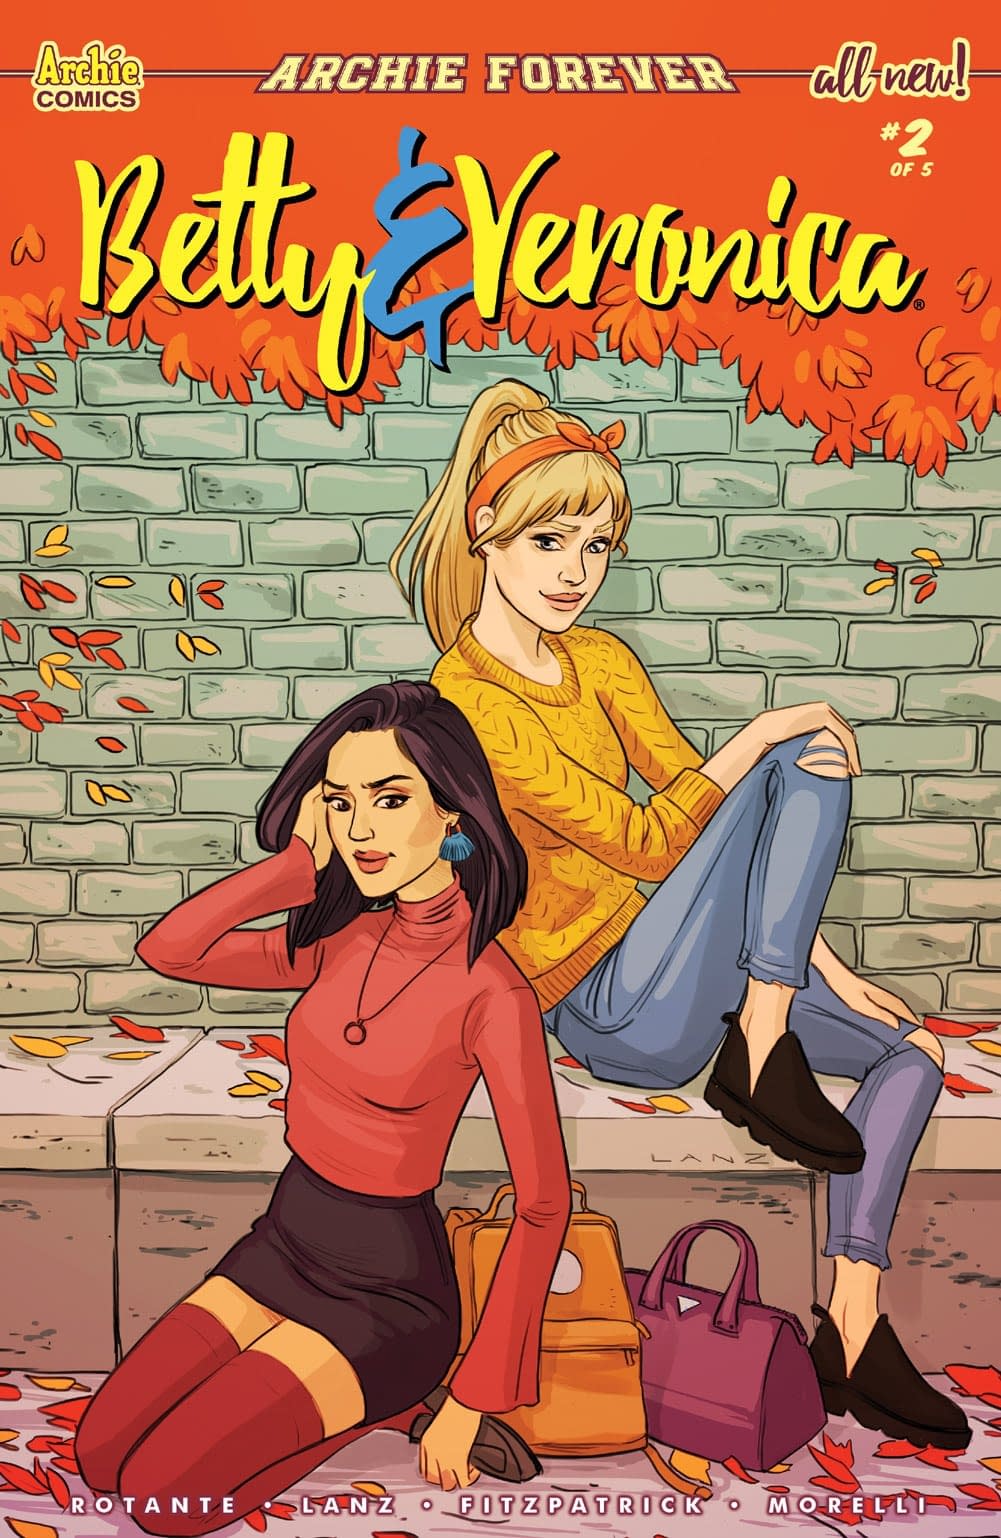 No Respect for Deadlines in This Week's Betty &#038; Veronica #2